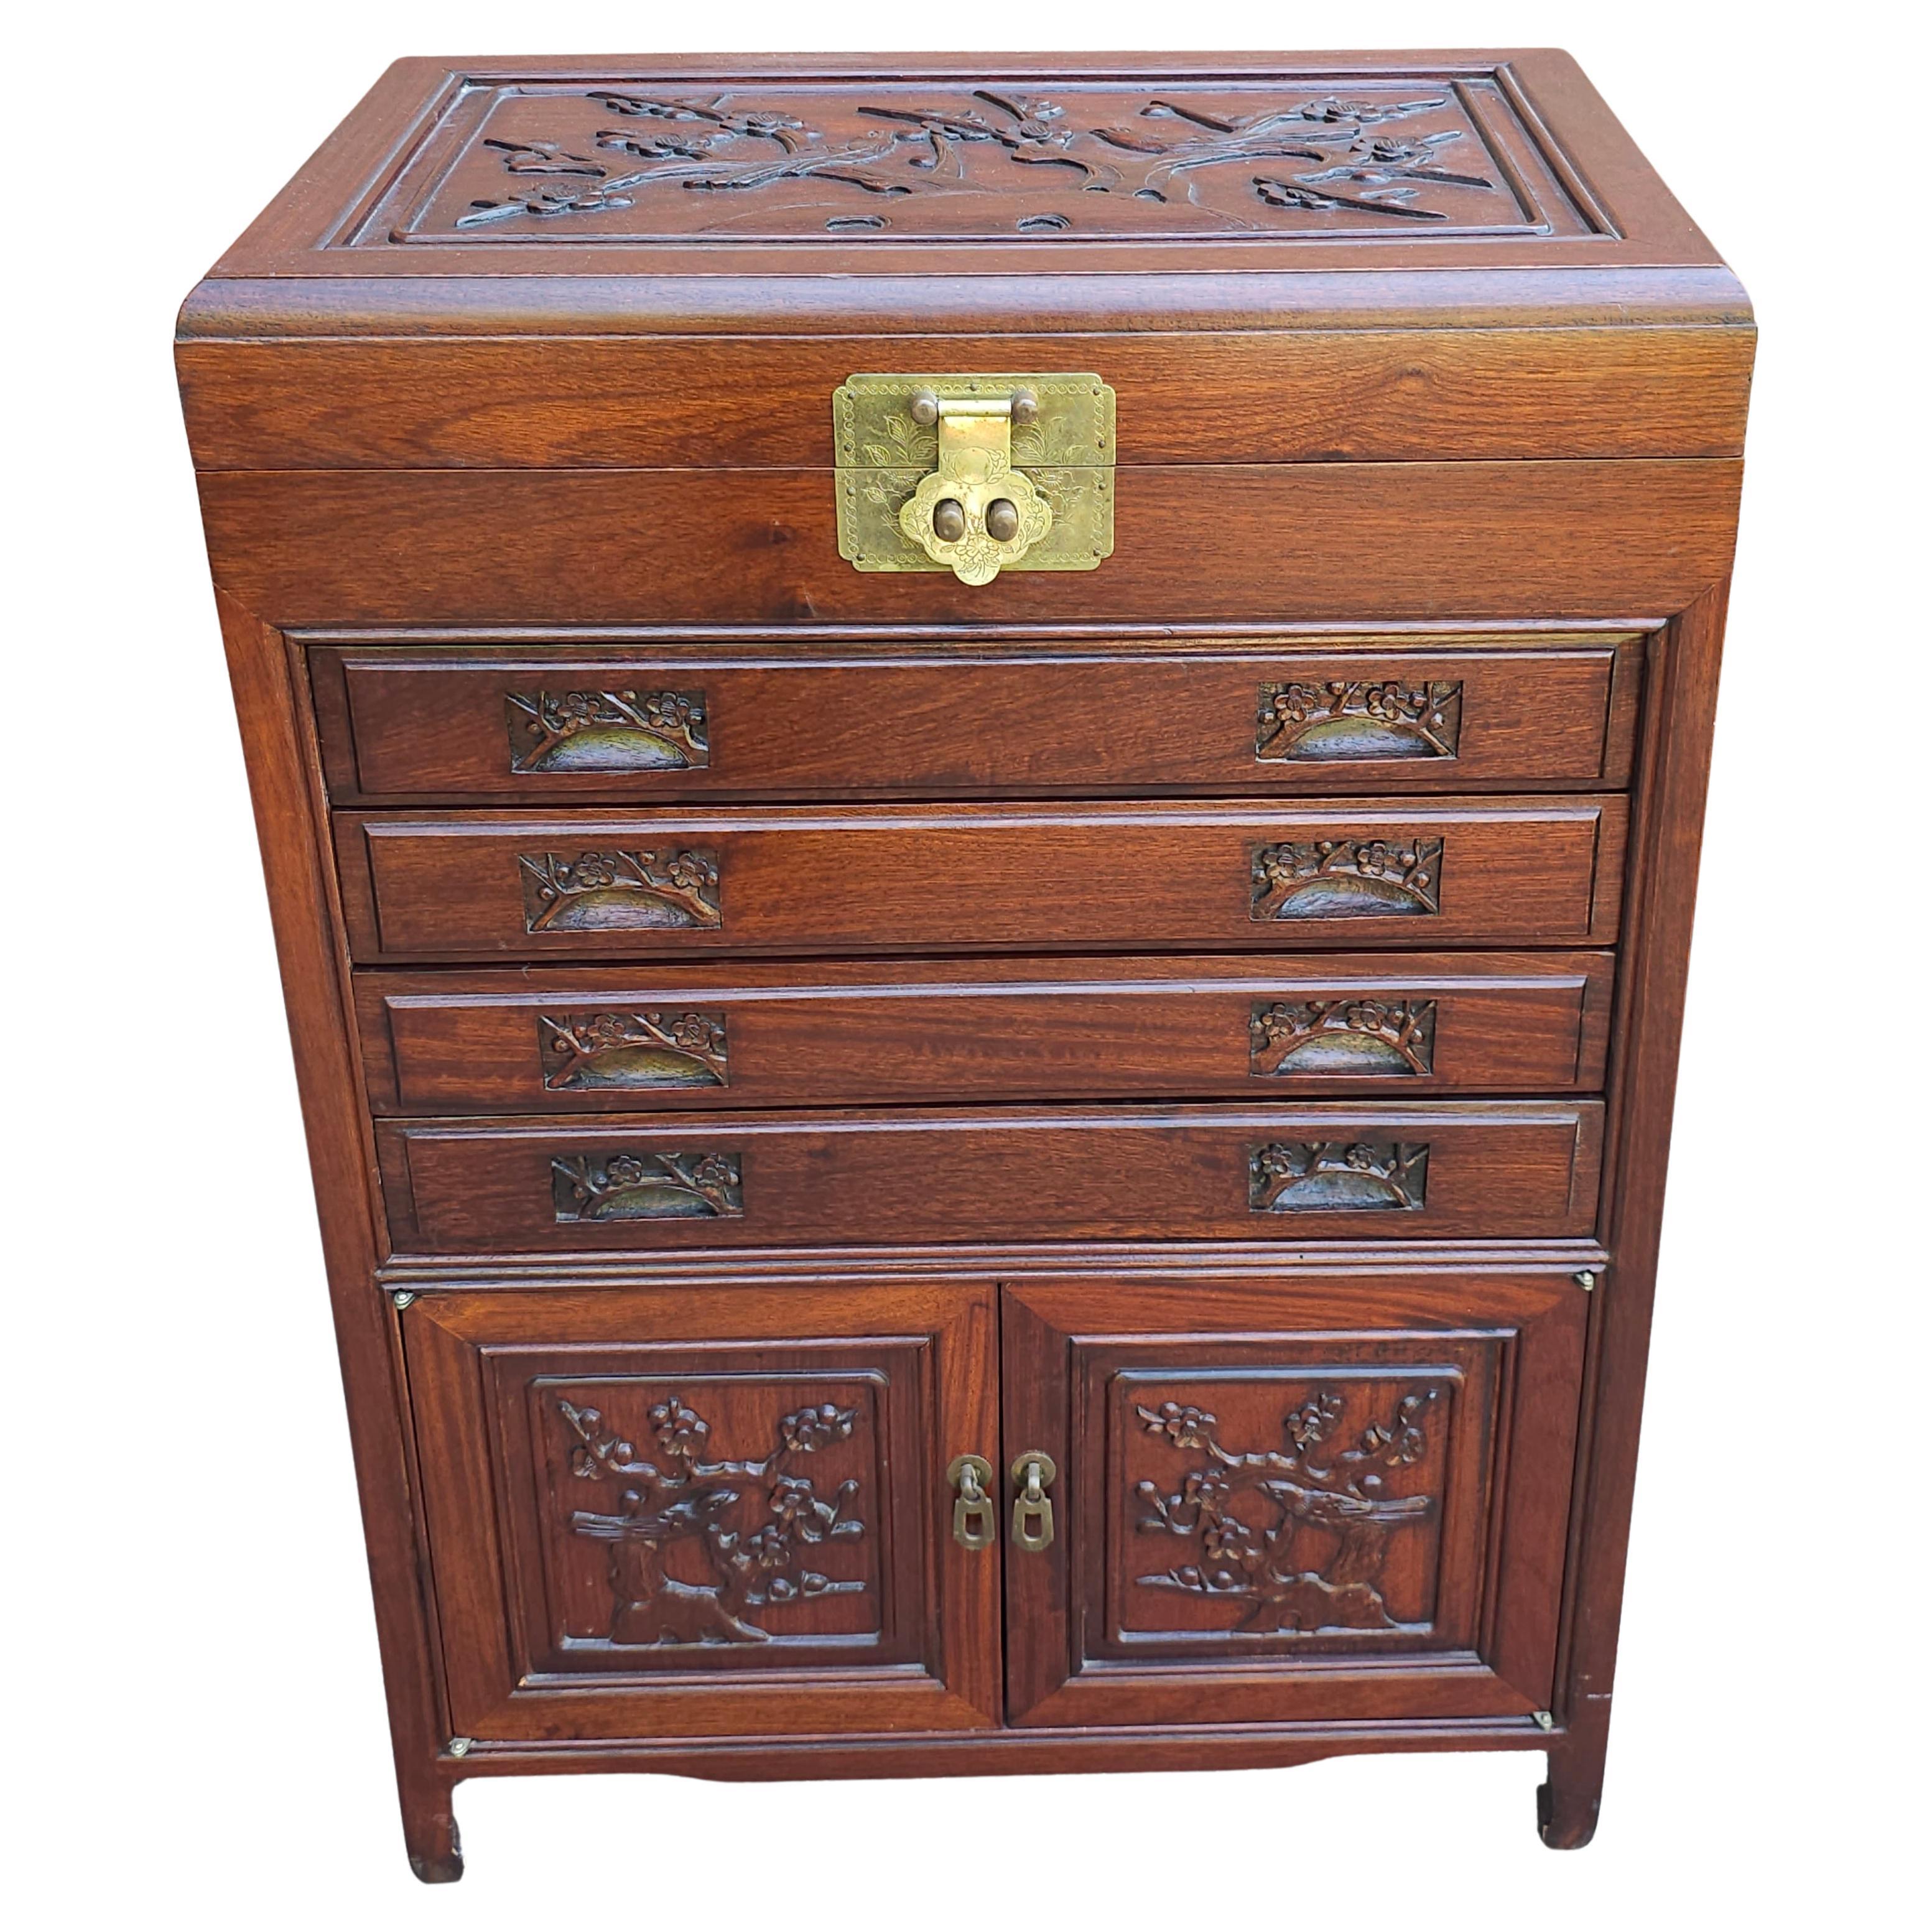 An exceptional Mid-20th Century Chinese Carved Rosewood Siver Chest and Cabinet in great vintage condition.
Features a flip top that open to reveal two flatware storage trays all felt lined. The Four drawers open open and close flawlessly and are